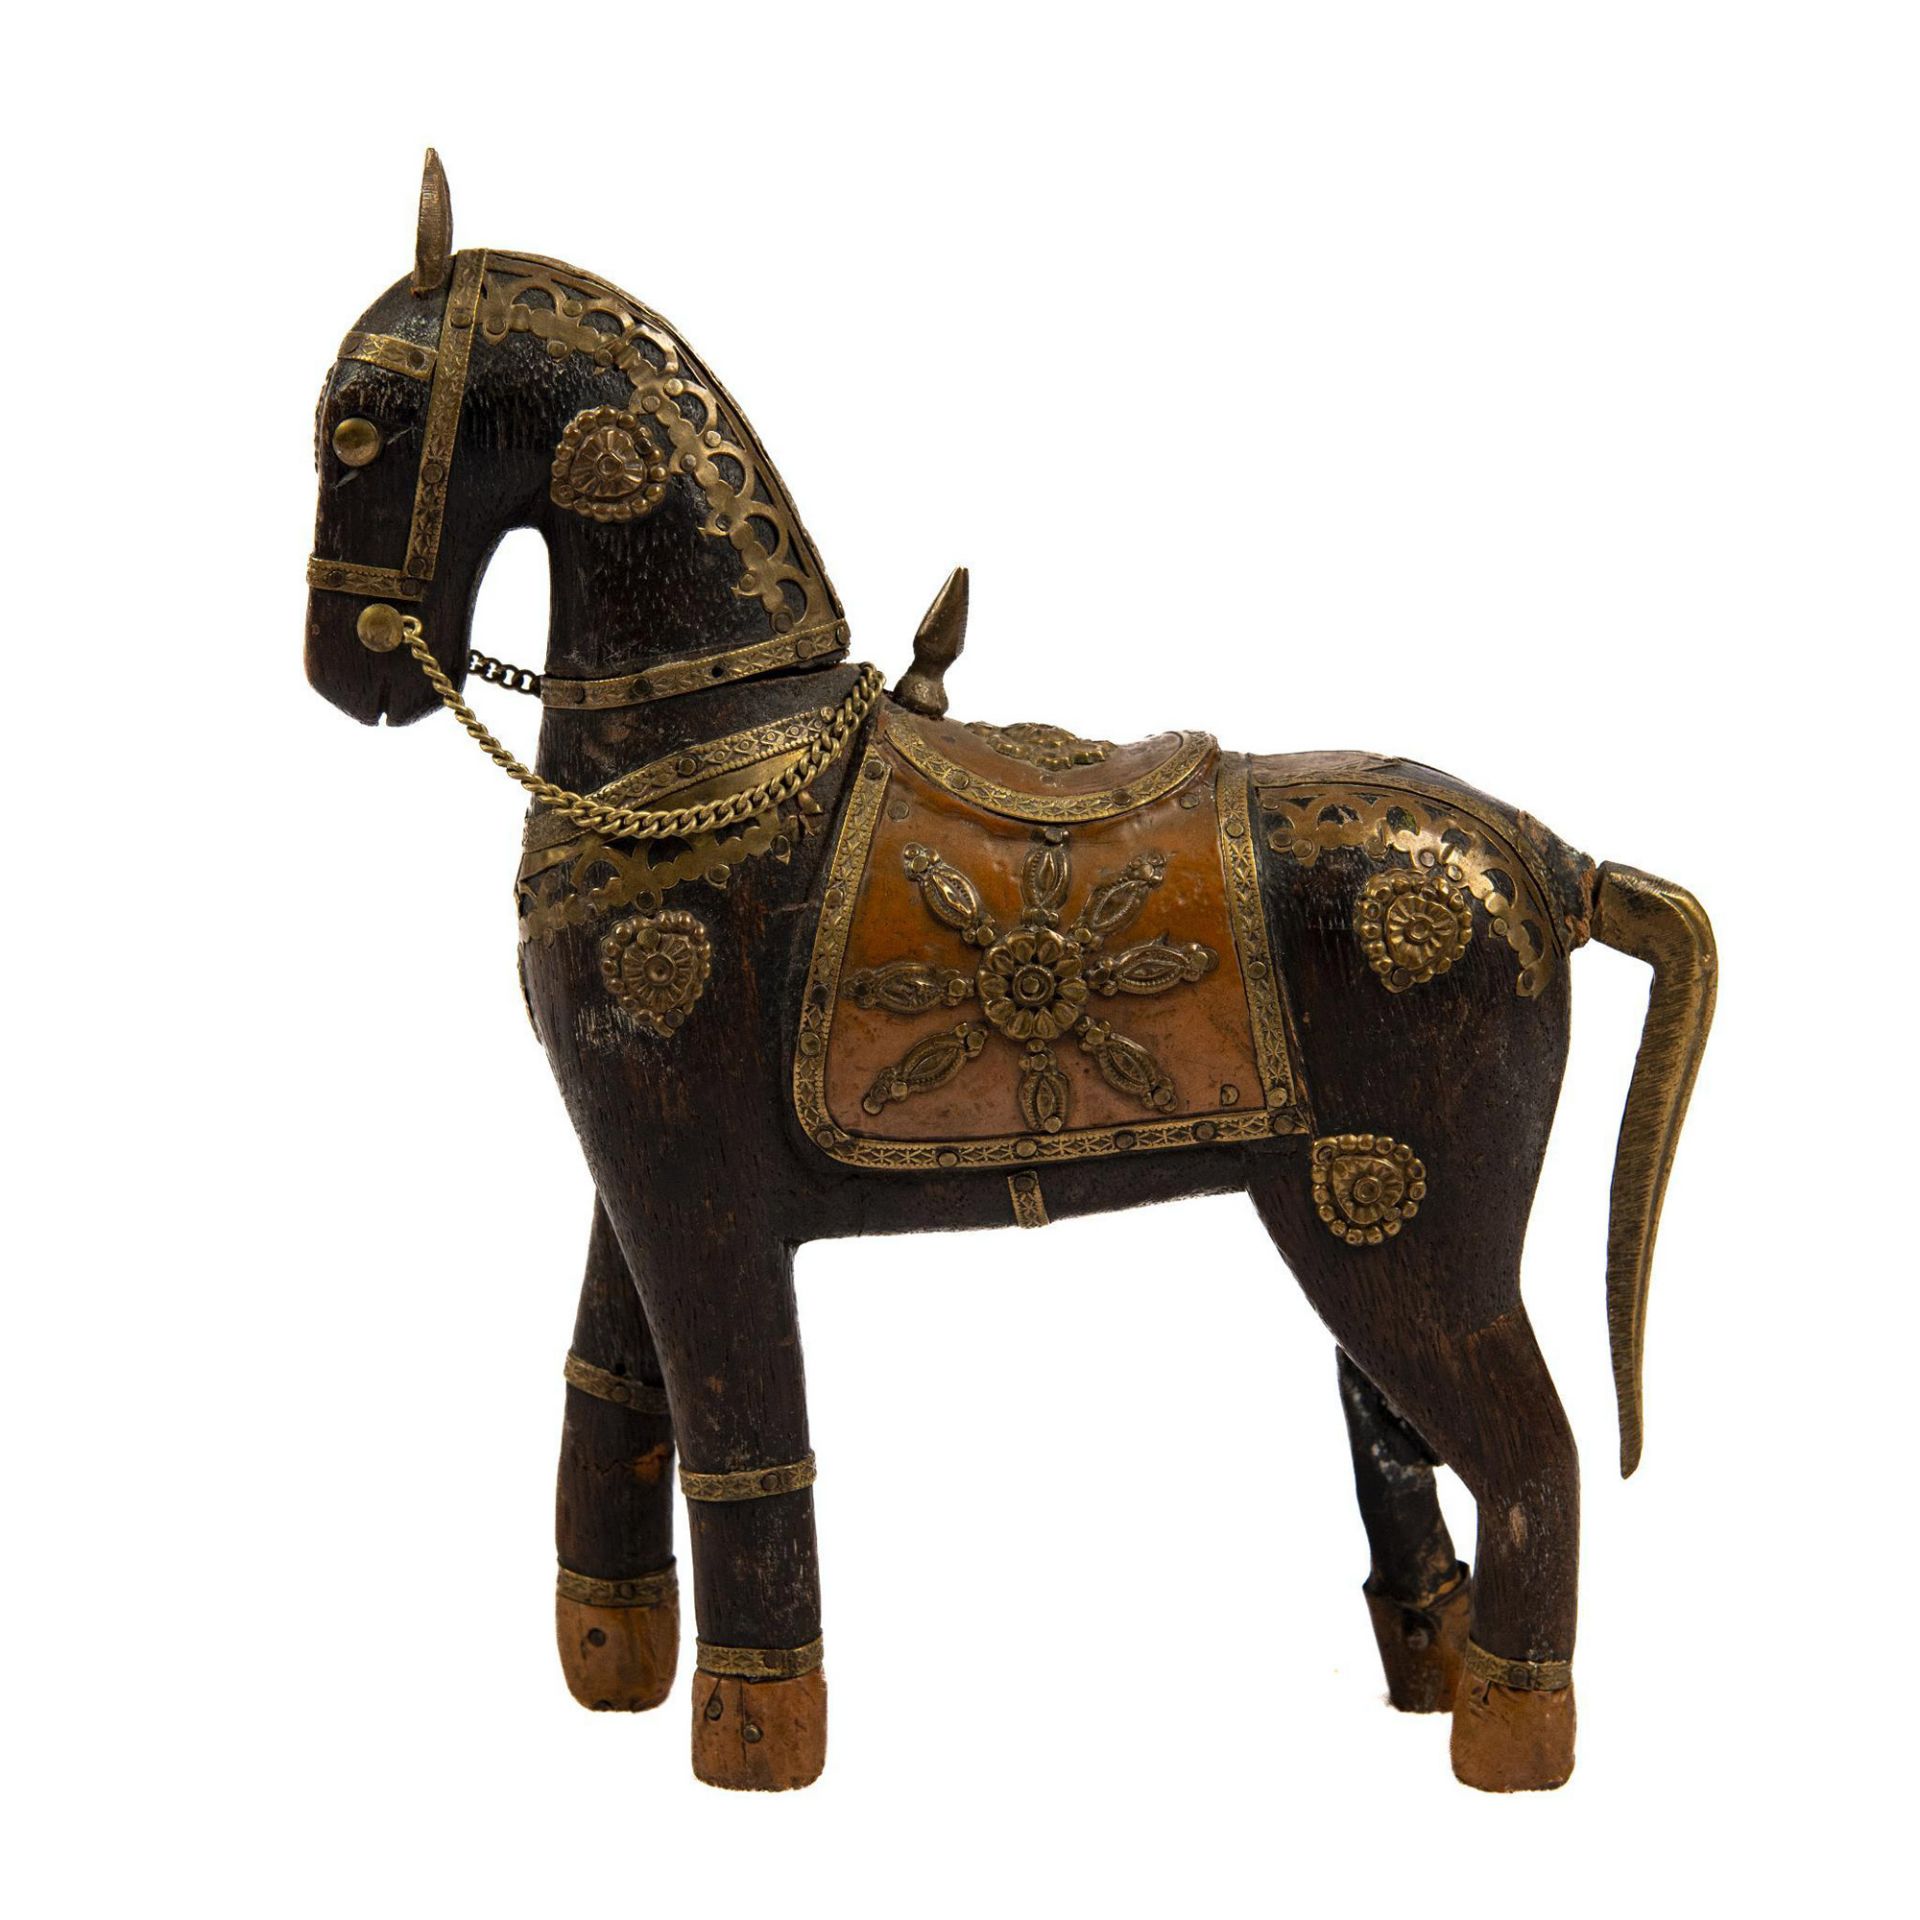 Rajasthani Indian Wooden War Horse, Brass & Copper Accents - Image 2 of 4